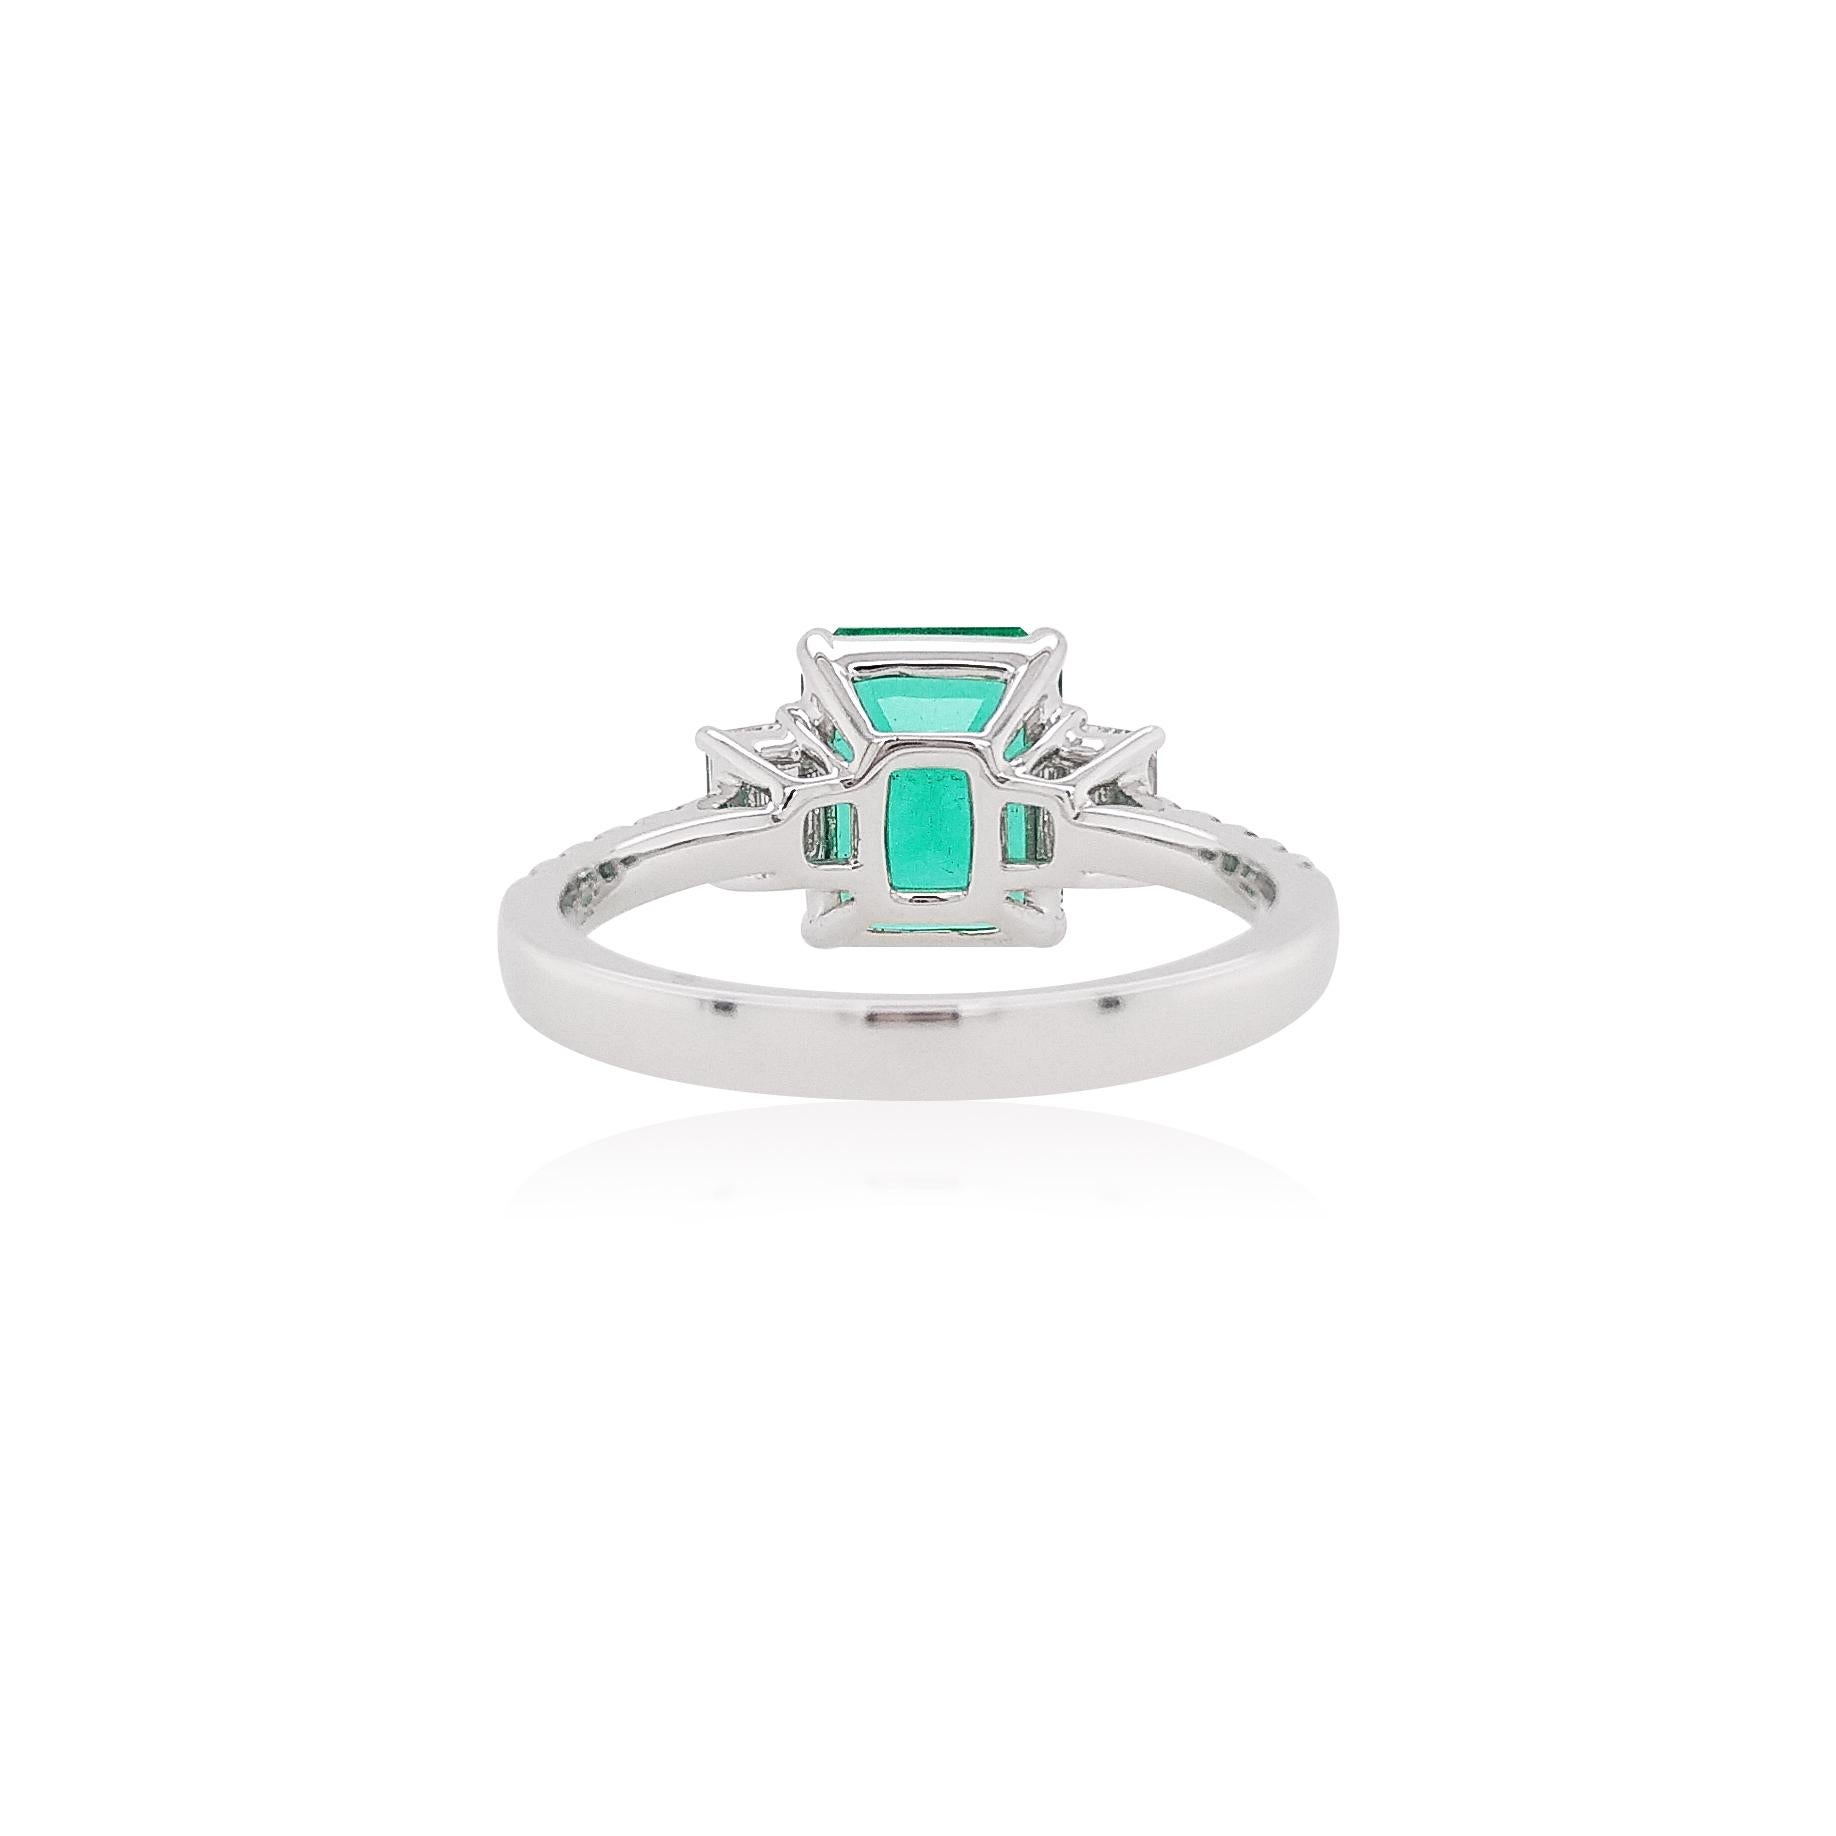 This delicate Platinum ring features a lustrous Colombian Emerald at the forefront of its design. The spectacular hues of the Emerald are perfectly accentuated by the Platinum setting and elegant Emerald-Cut Diamonds shoulders. A versatile piece,